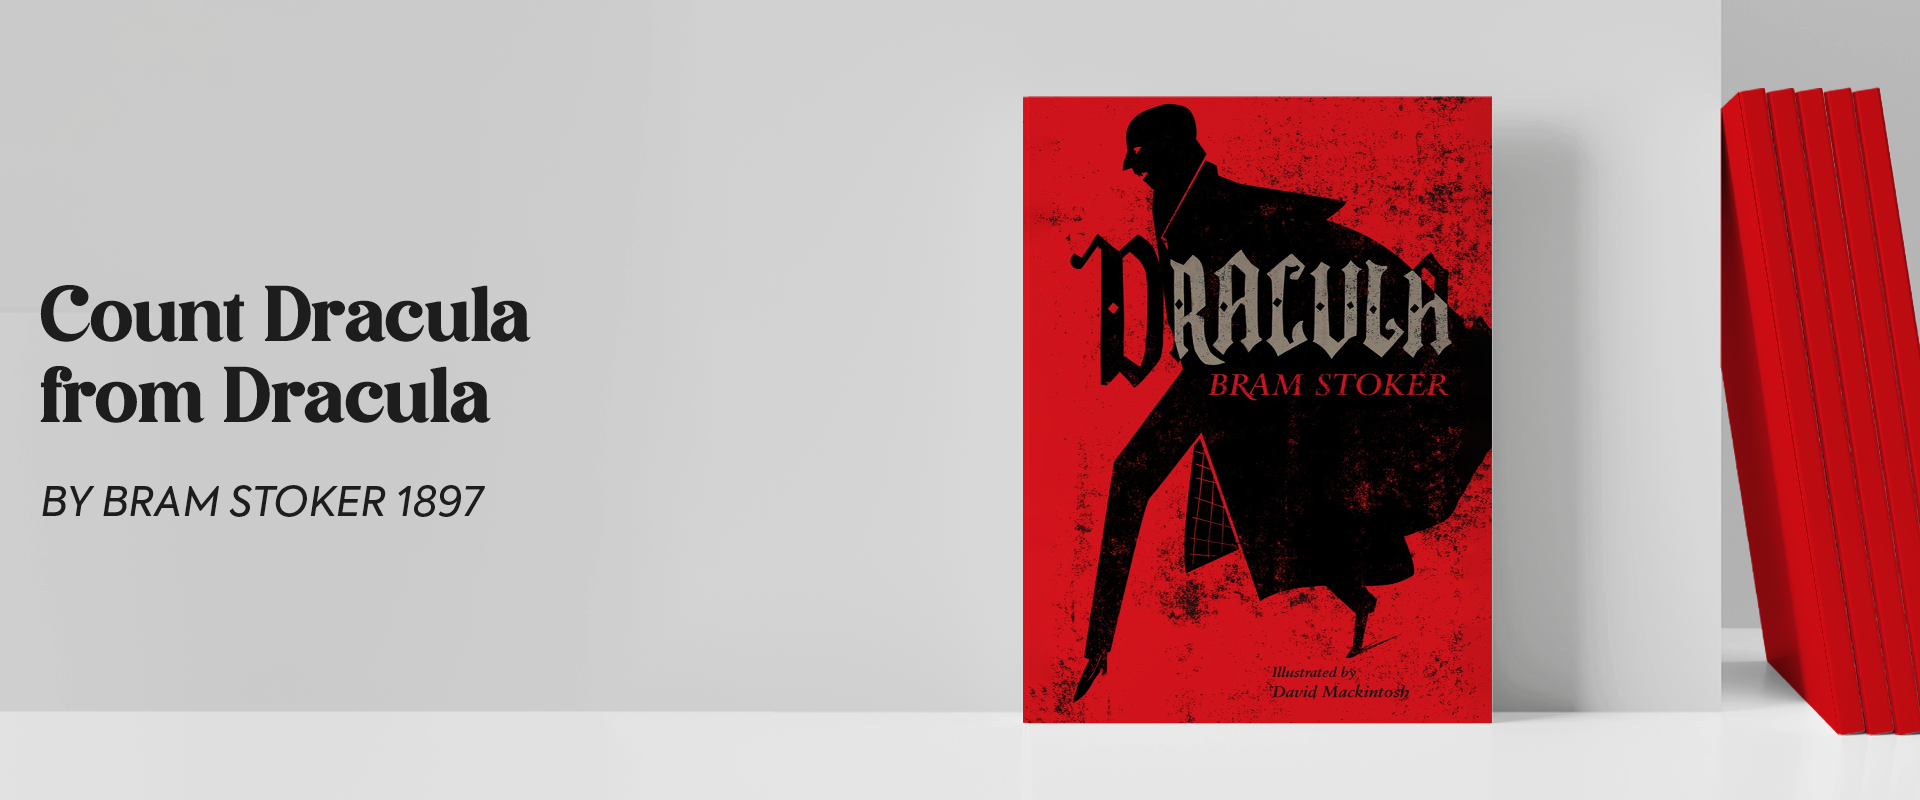 Count Dracula from Dracula by Bram Stoker.